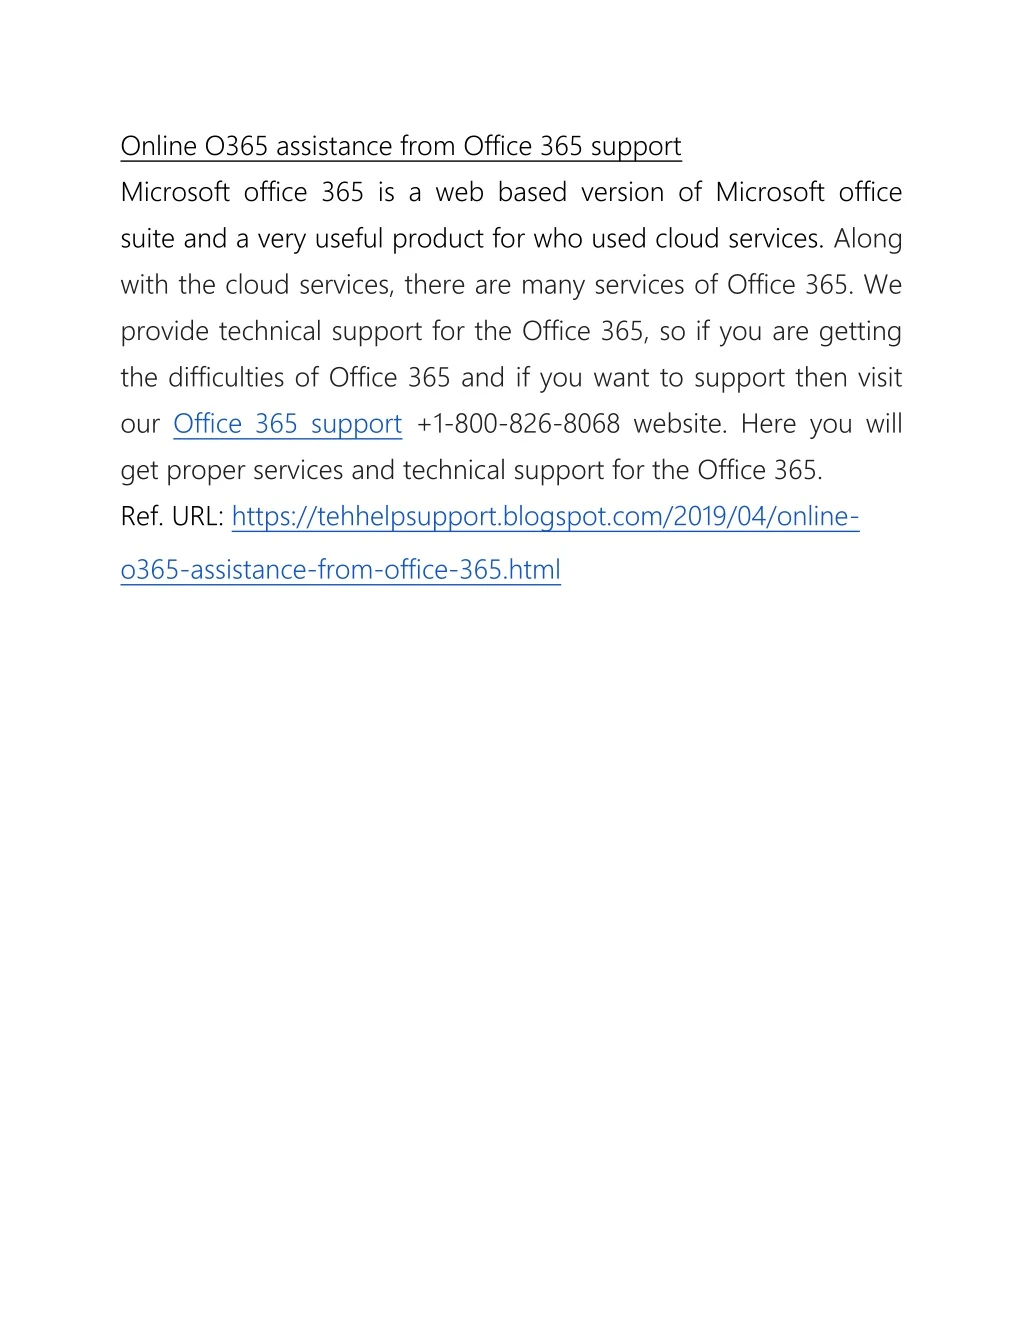 online o365 assistance from office 365 support